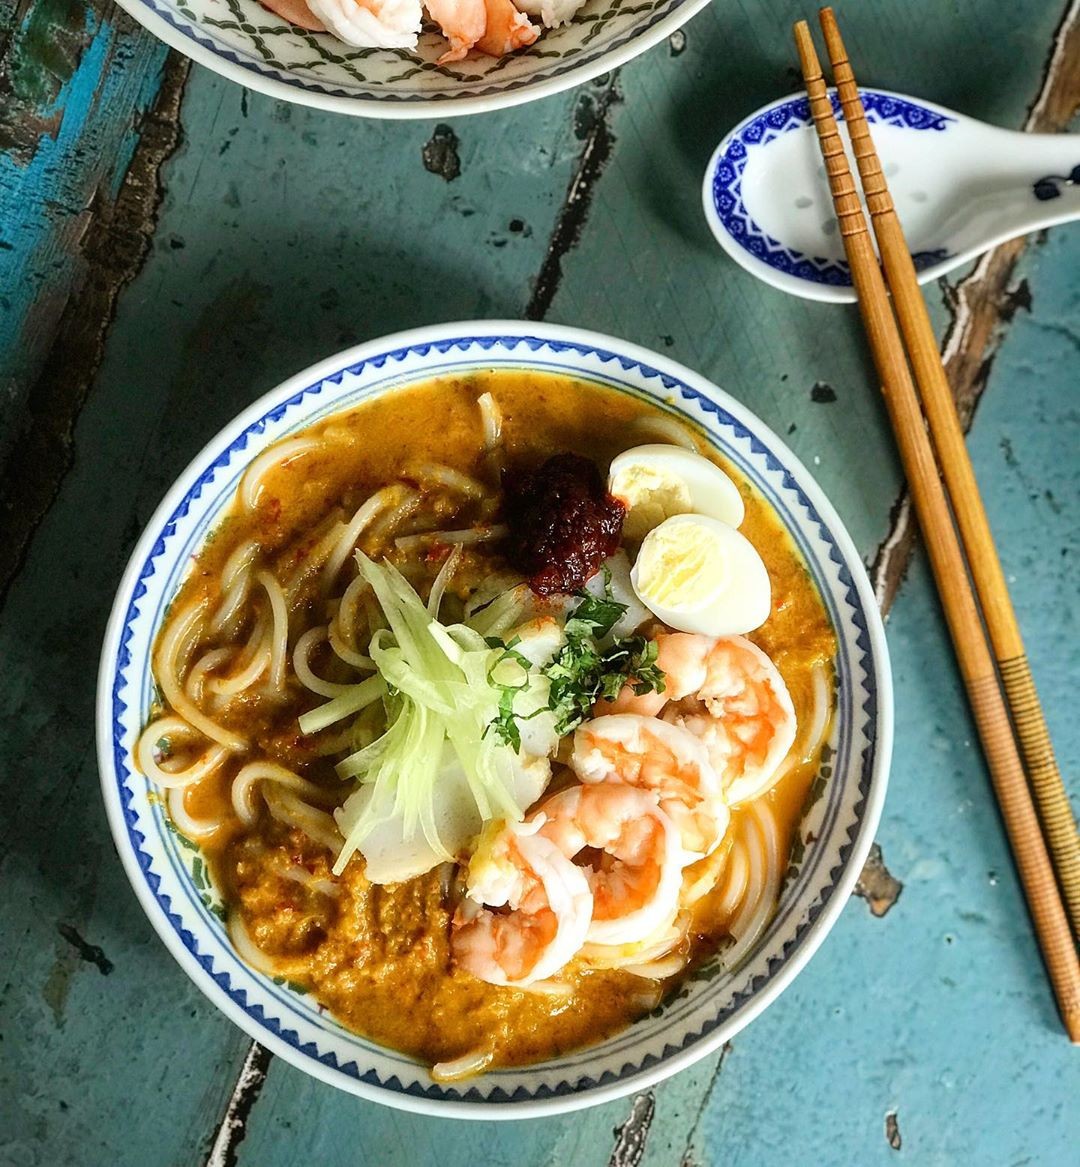 Laksa is among the dishes available at Singapore-based food writer Annette Tan’s FatFaku.